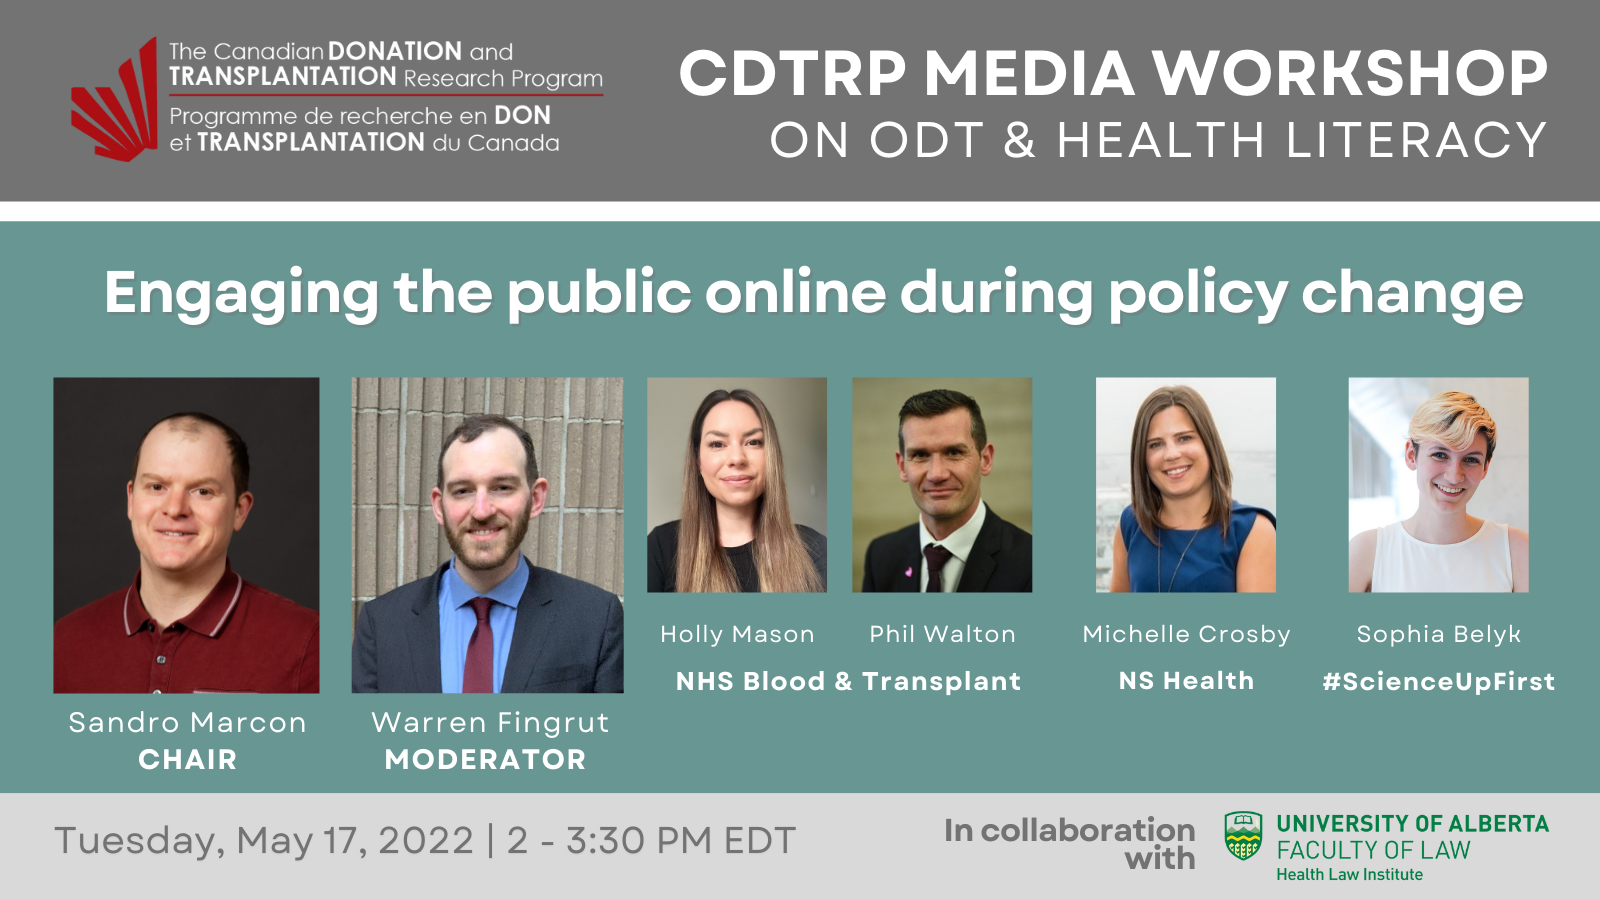 CDTRP Media Workshop on ODT & Health Literacy: Engaging the public